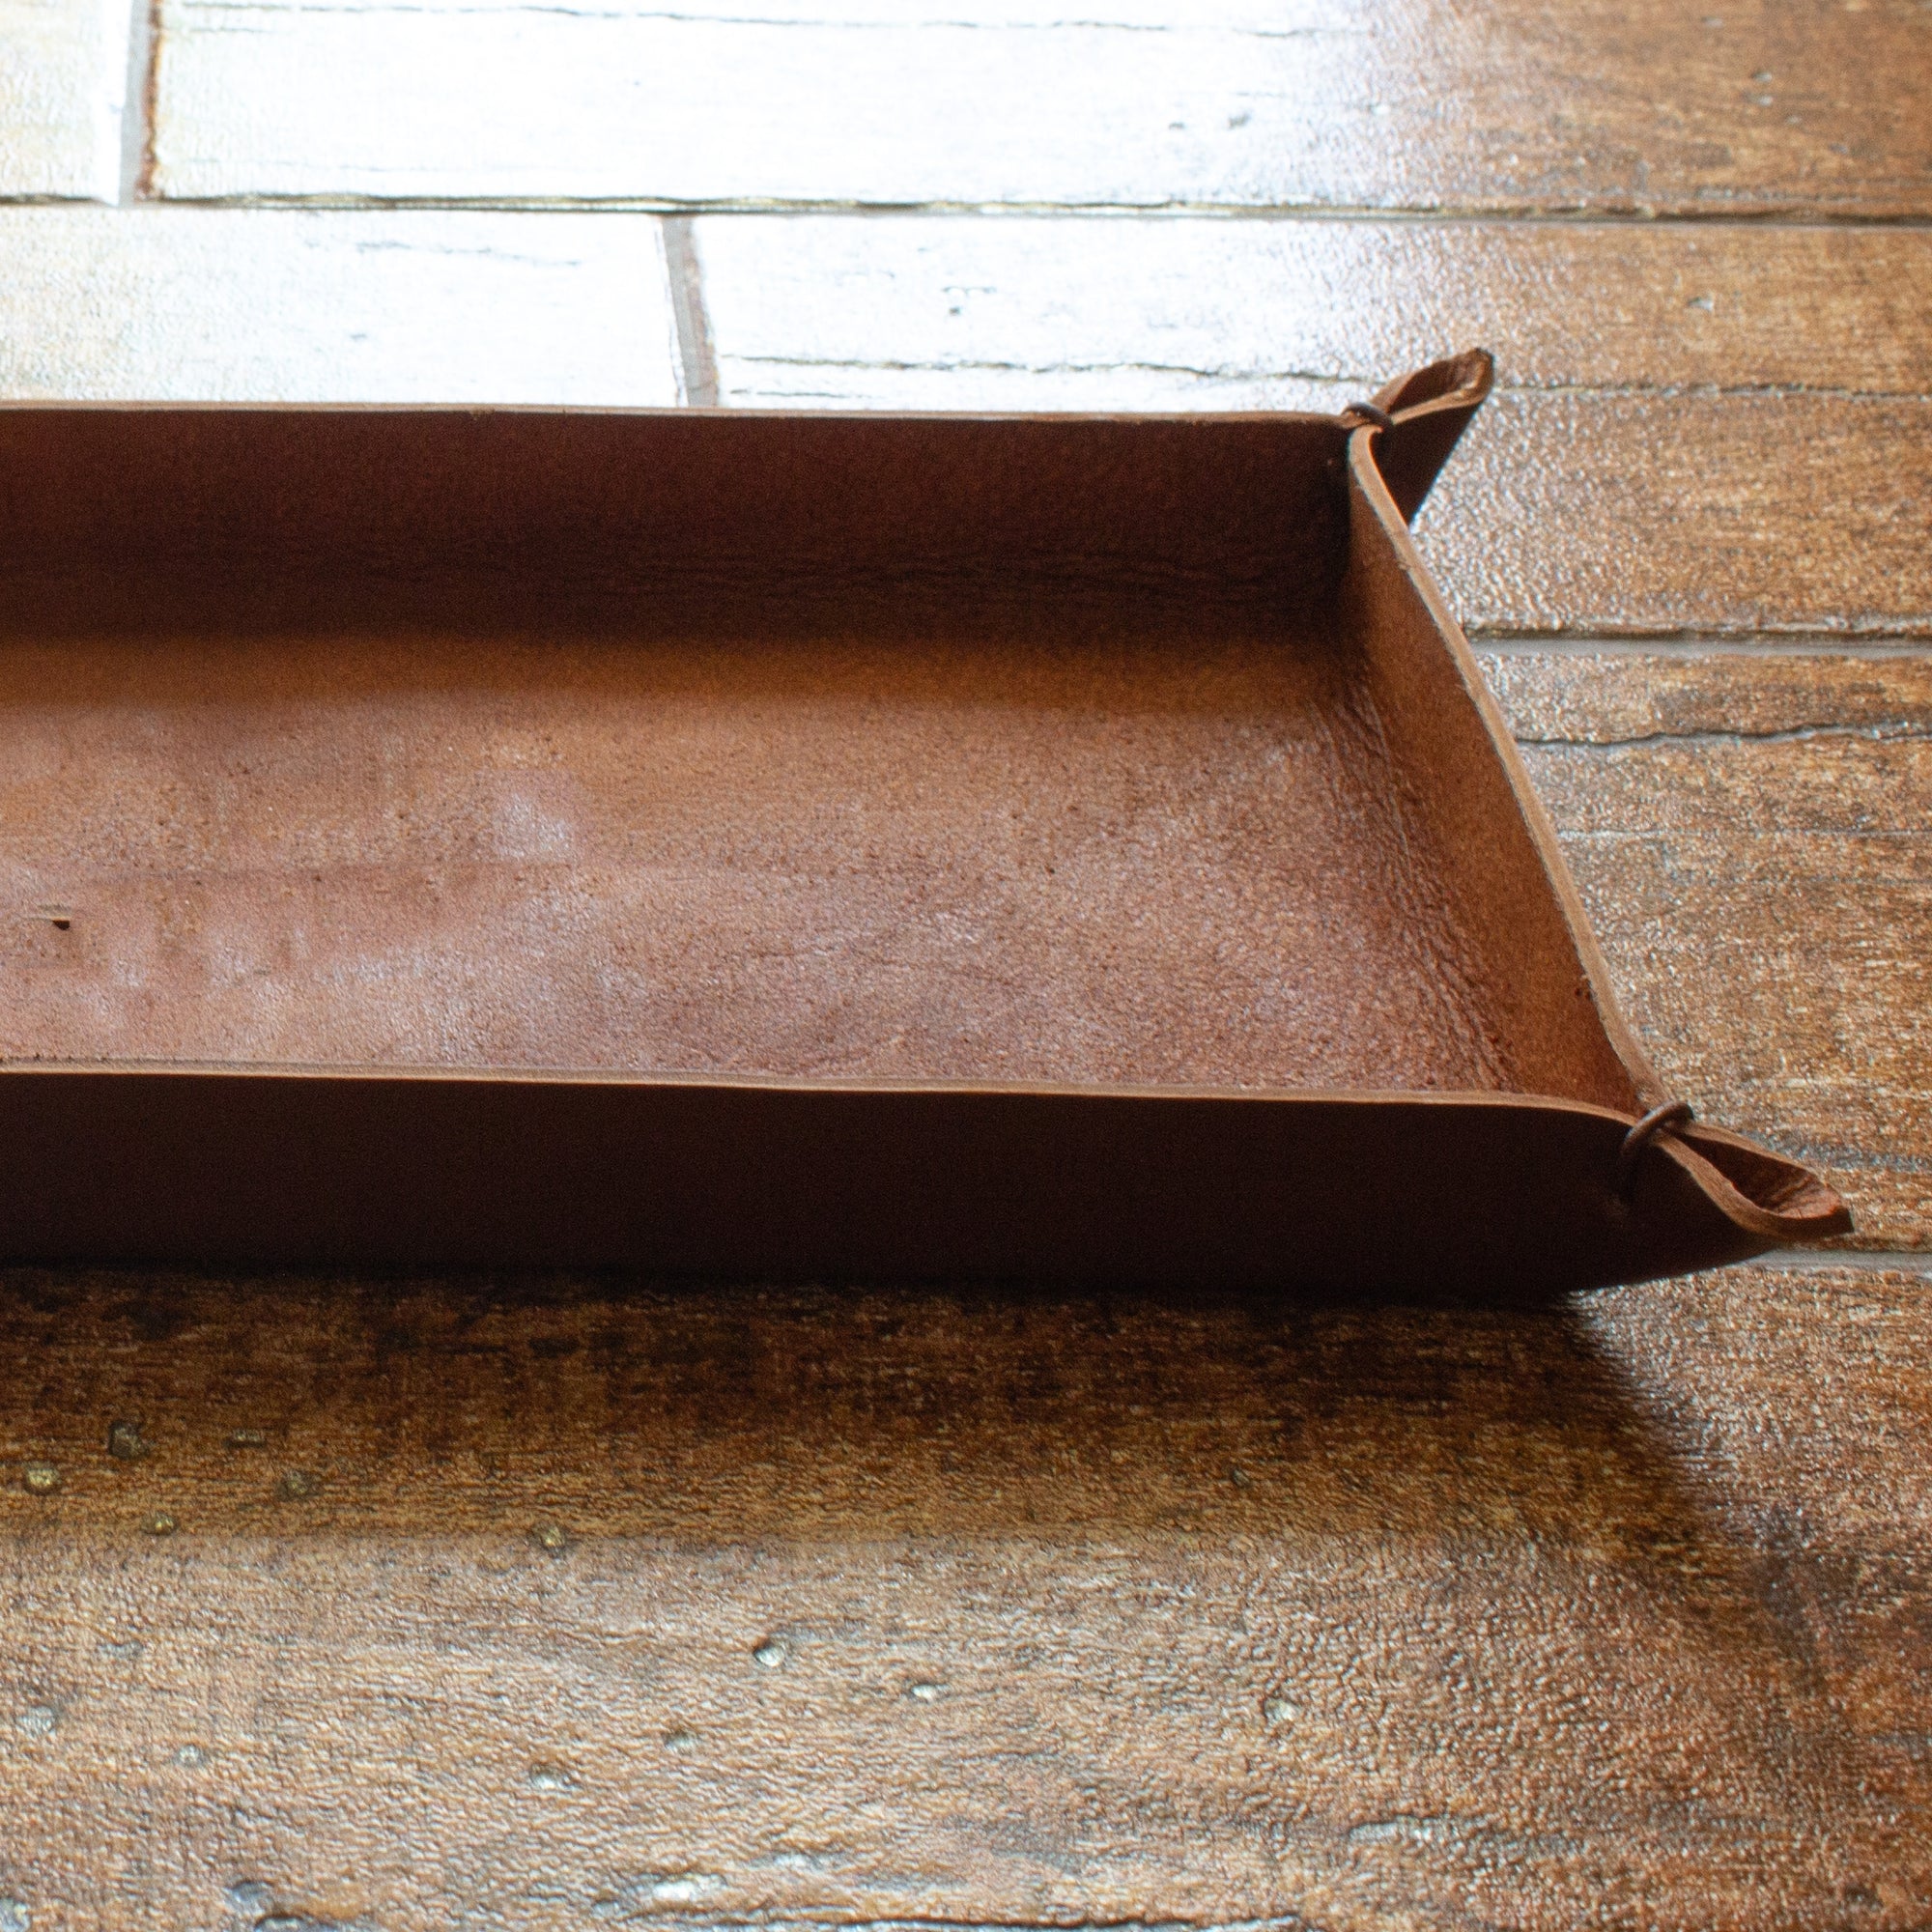 A view of a rectangular whisky brown-colored tray made from Italian full-grain leather.